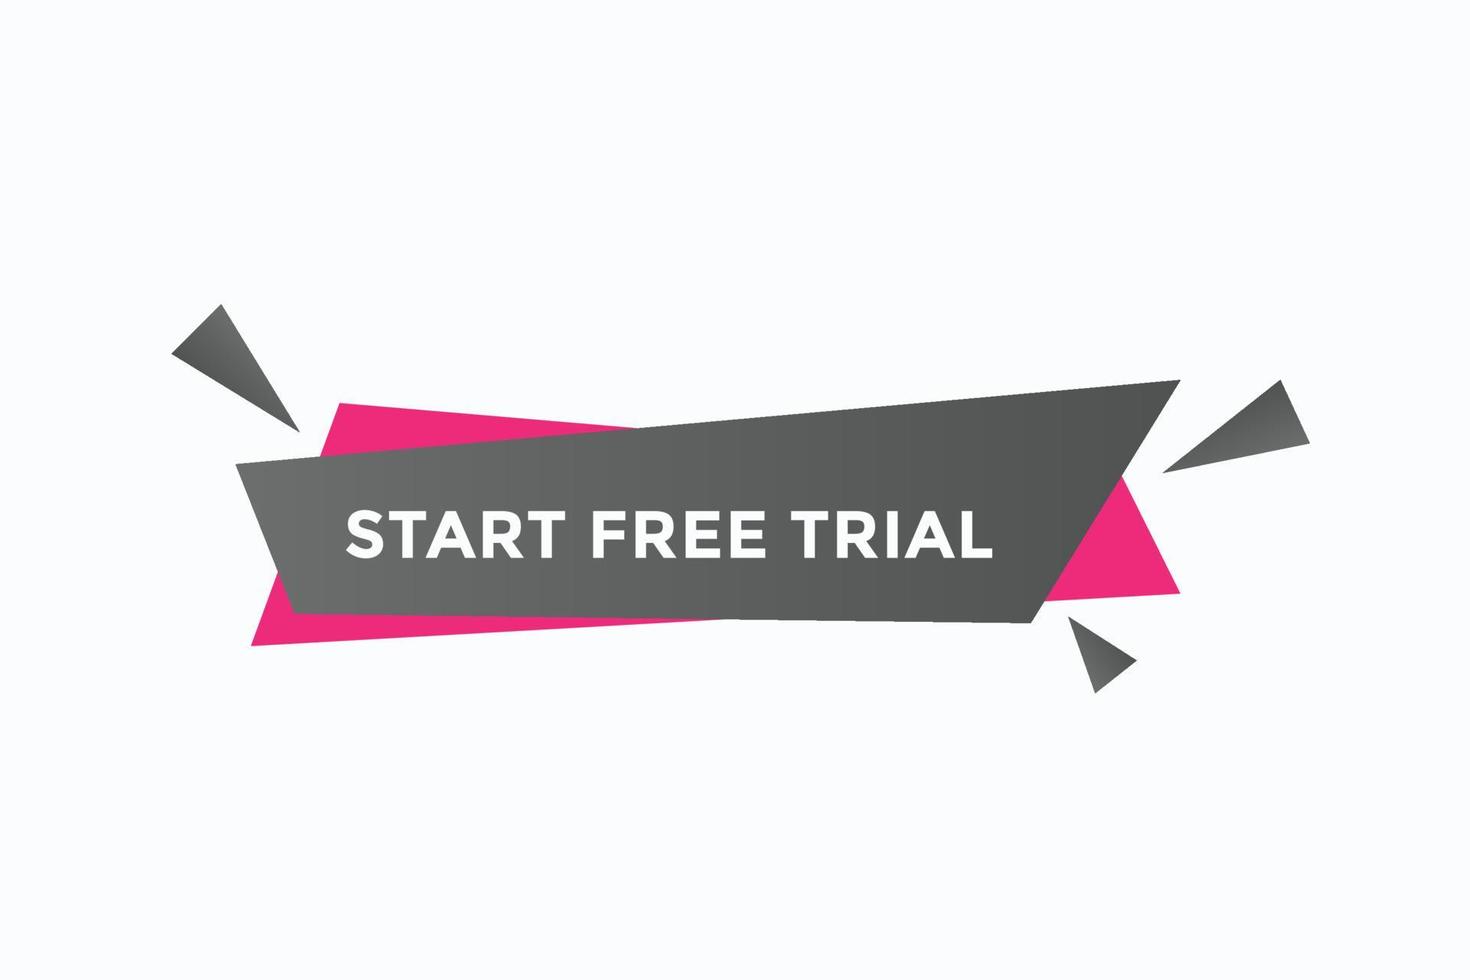 start free trial button vectors.sign label speech bubble start free trial vector